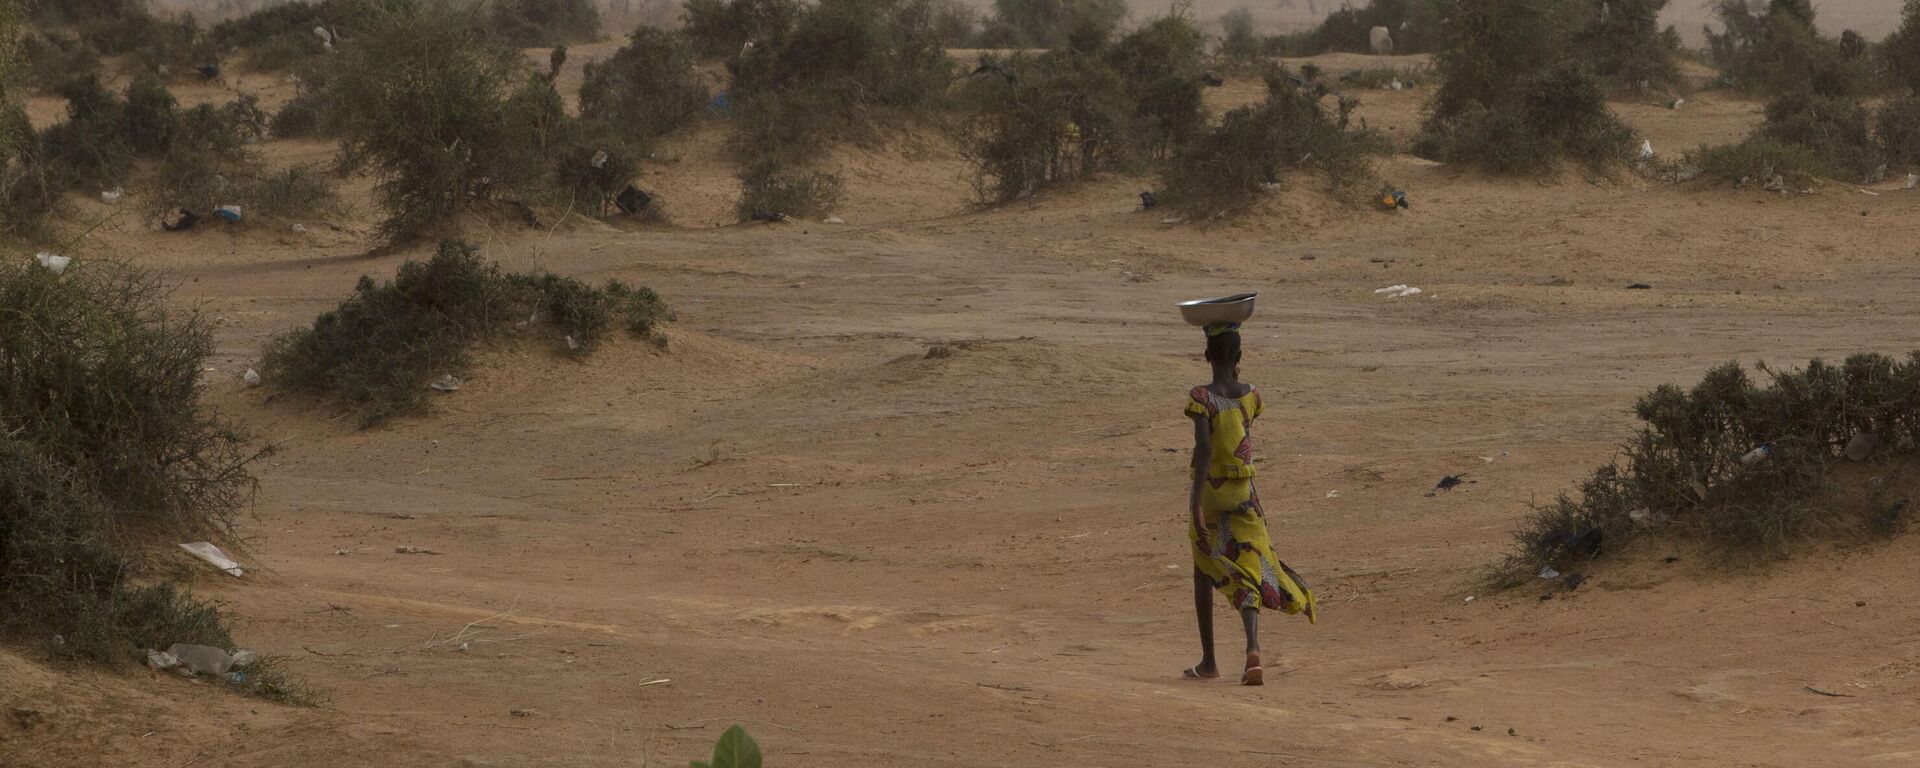 In this Monday, April 30, 2012 photo, a girl follows a village path through a landscape dotted with thorny scrub brush, in the Matam region of northeastern Senegal.  - Sputnik Africa, 1920, 08.03.2023